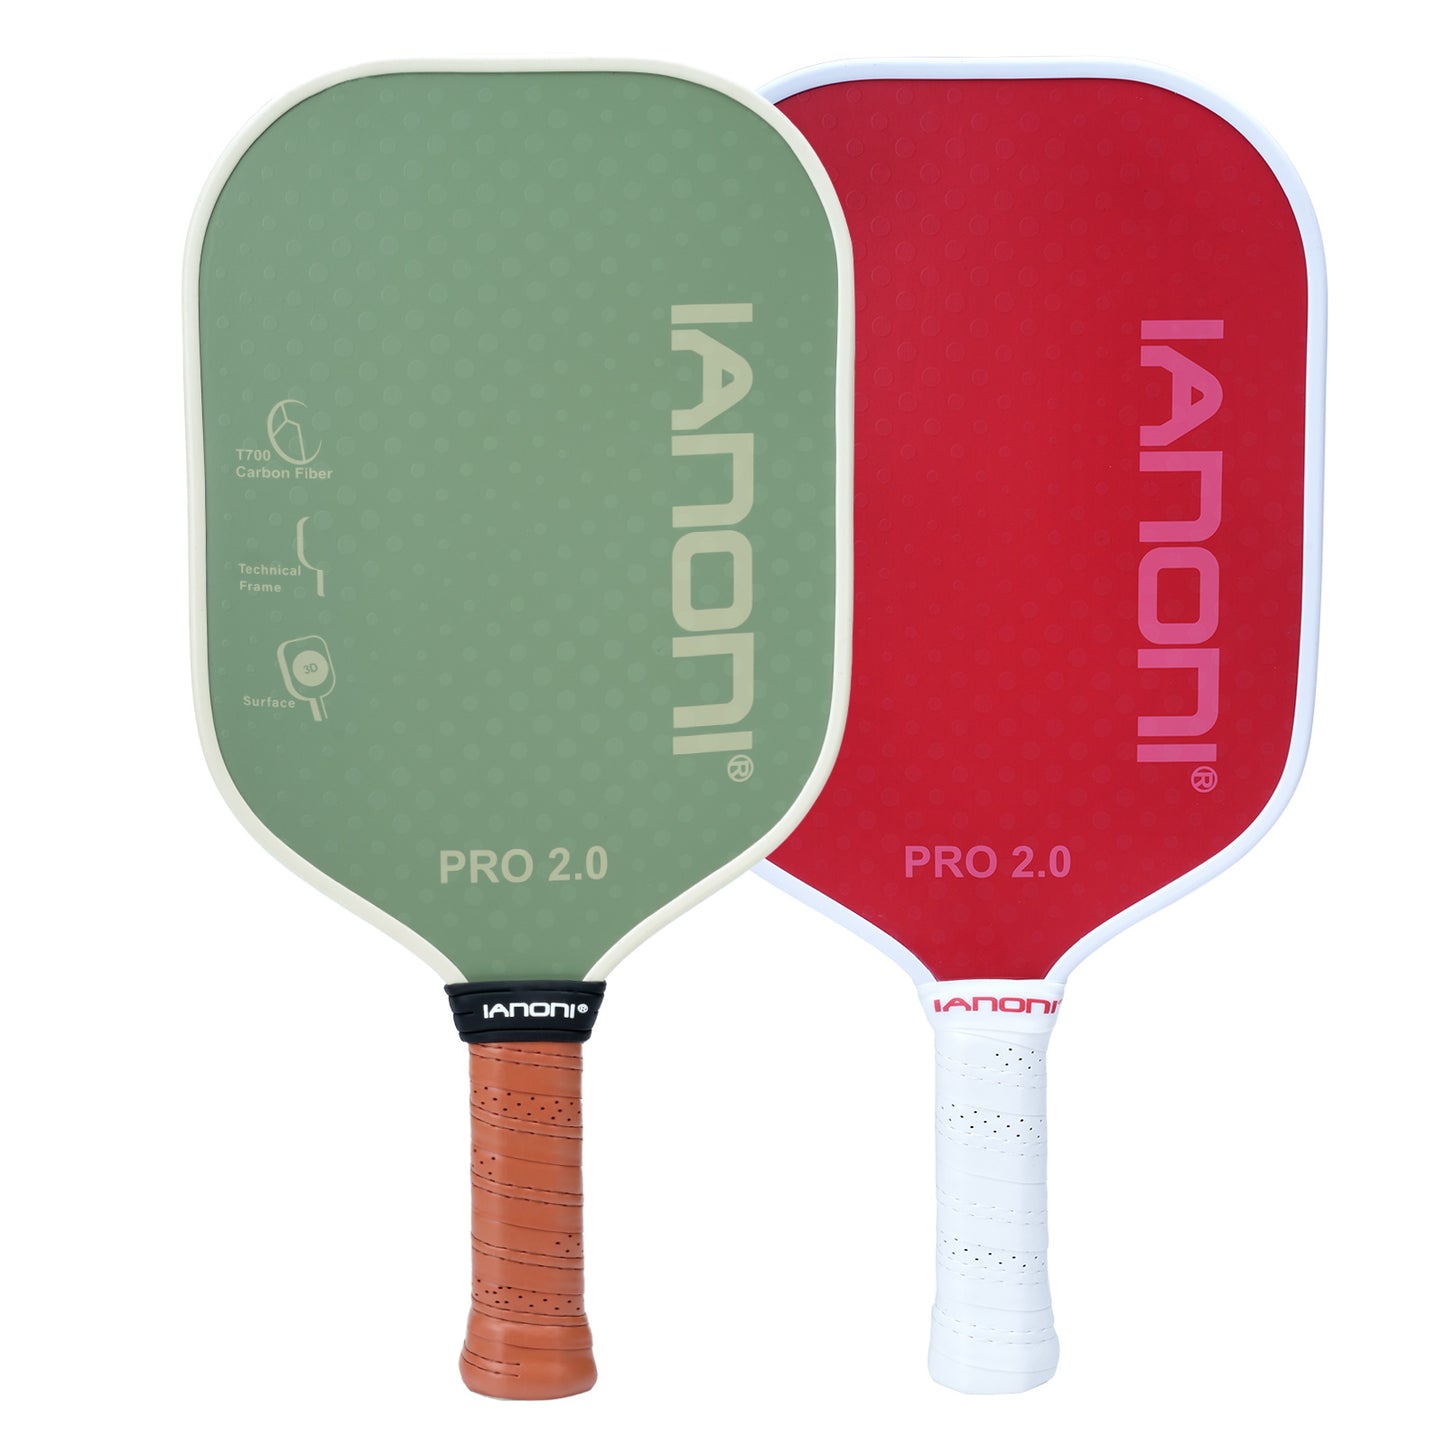 IANONI Optimum 3D Carbon Fiber Pickleball Paddles , Extreme Spin Technology for Increased Control,Graphite Pickleball Rackets with Large Sweet Spot or Head-Heavy Balance